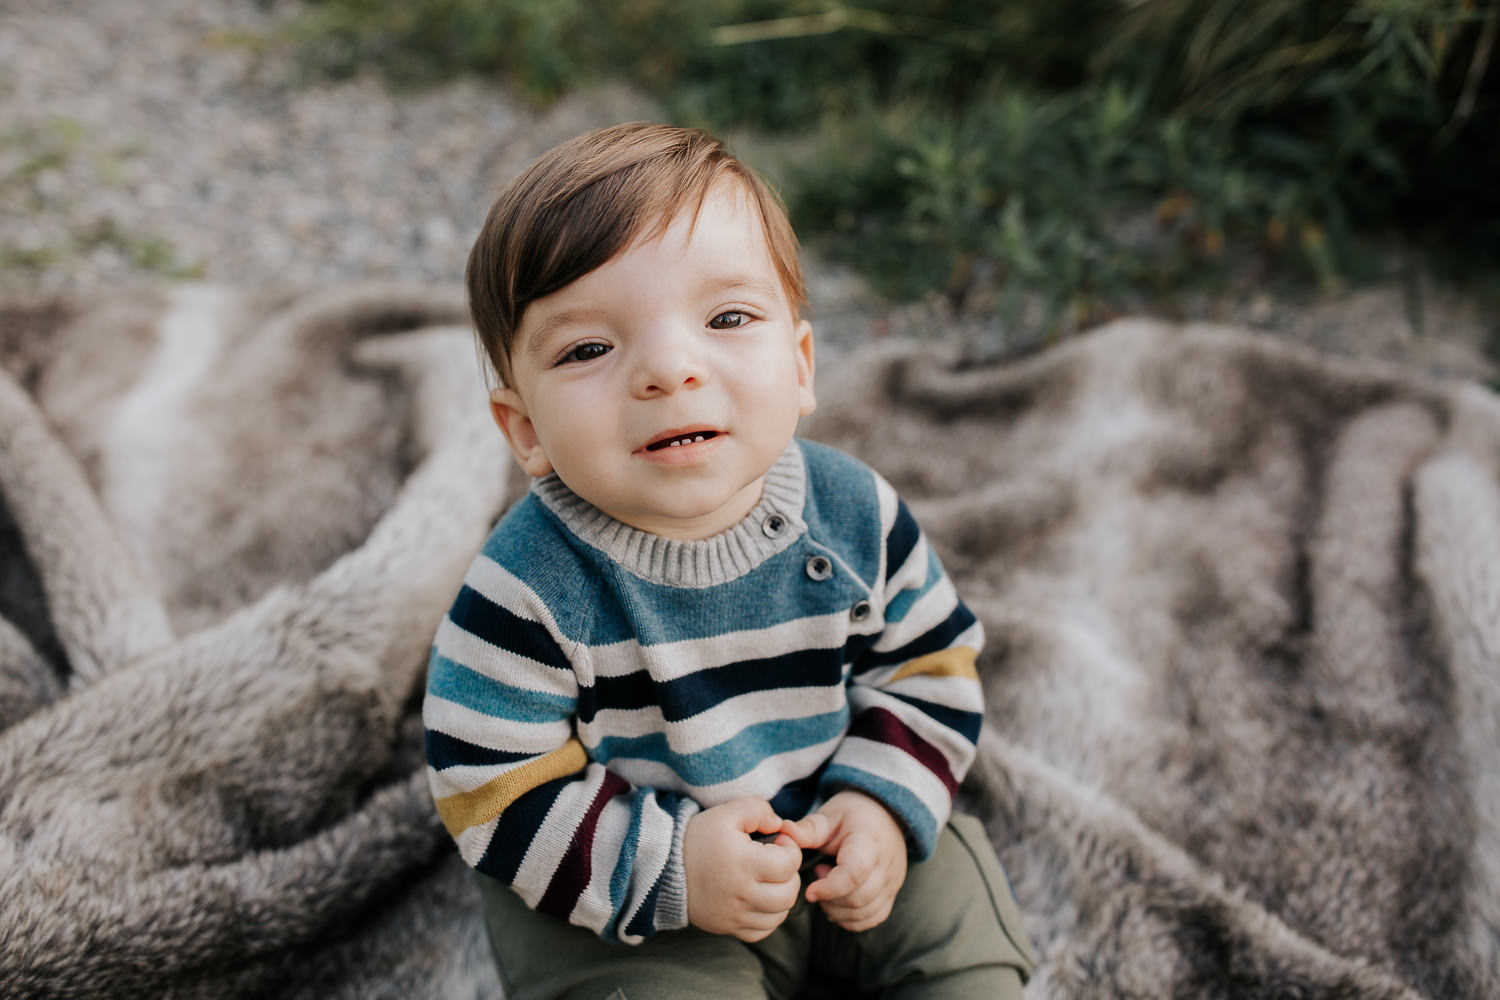 1 year old boy with brown hair and eyes wearing striped sweater sitting on blanket in outdoor path looking up at camera - Newmarket Golden Hour Photos